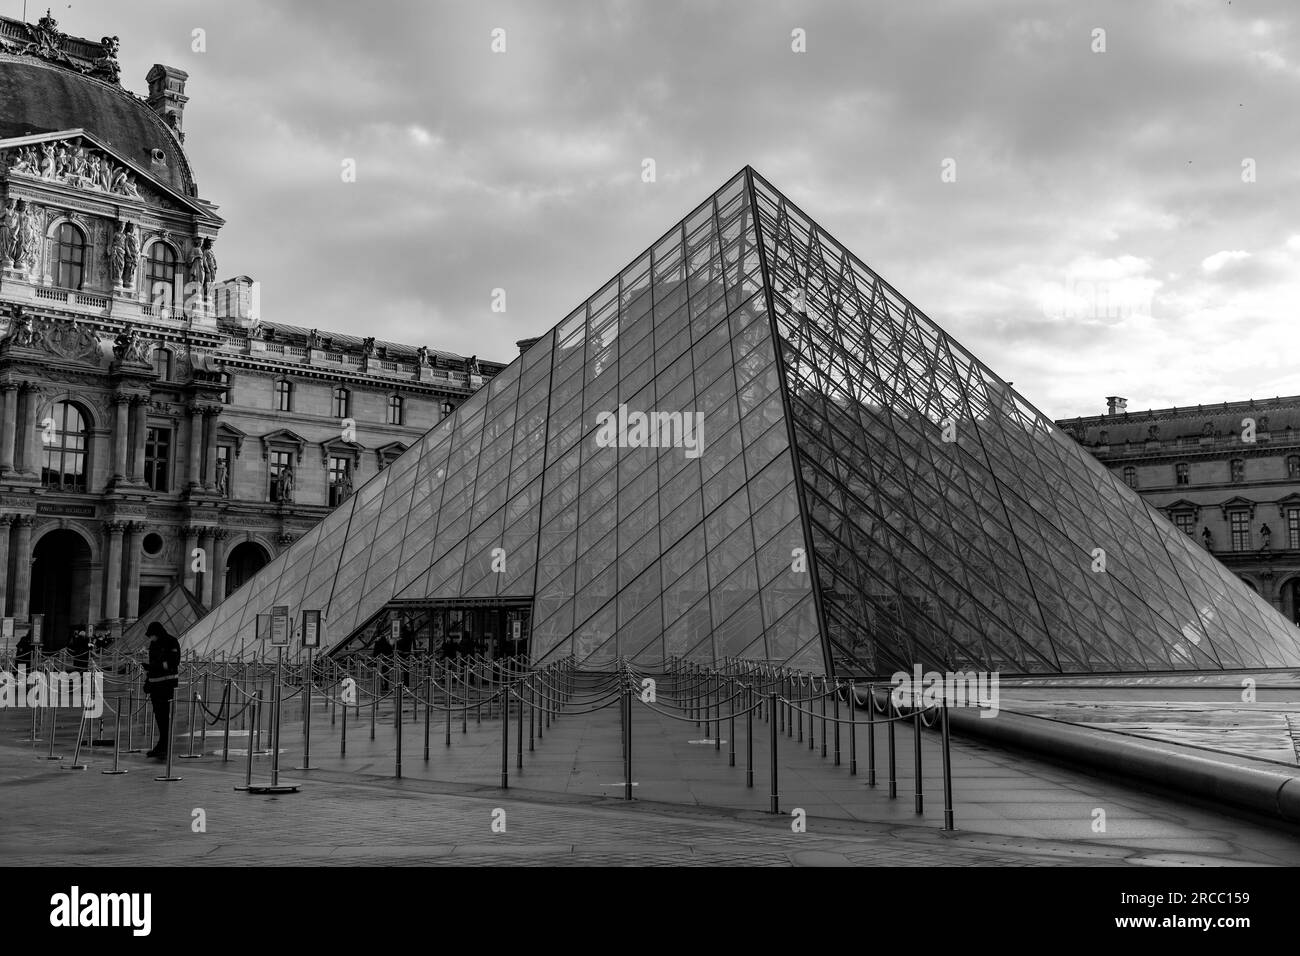 Paris, France - JAN 20, 2022: The glass pyramid of Louvre Museum, the main entrance to famous museum and gallery, completed in 1989. A beautiful winte Stock Photo